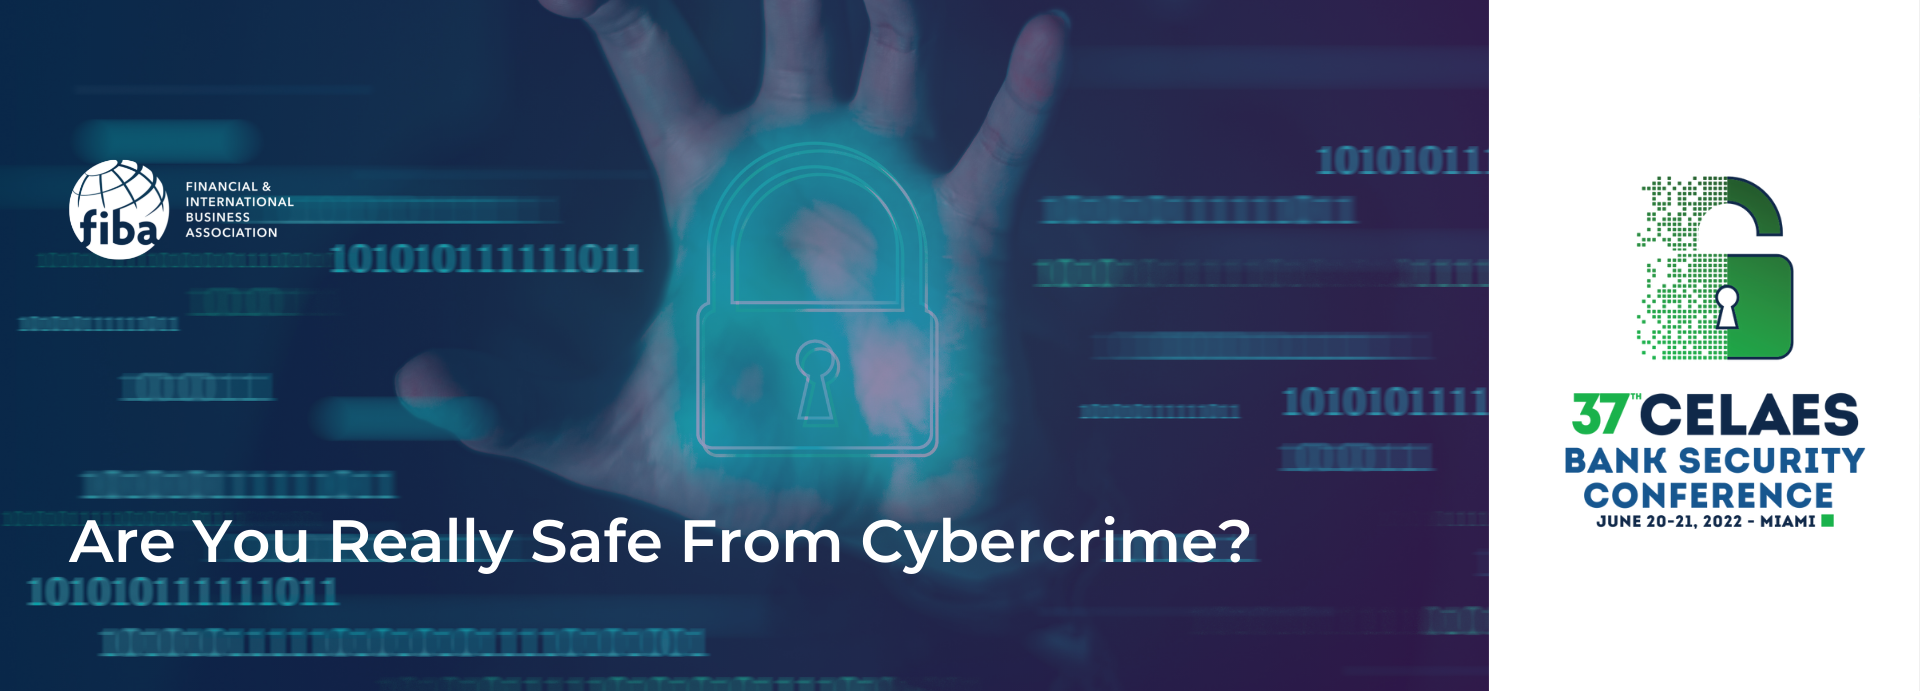 Are You Really Safe From Cybercrime?